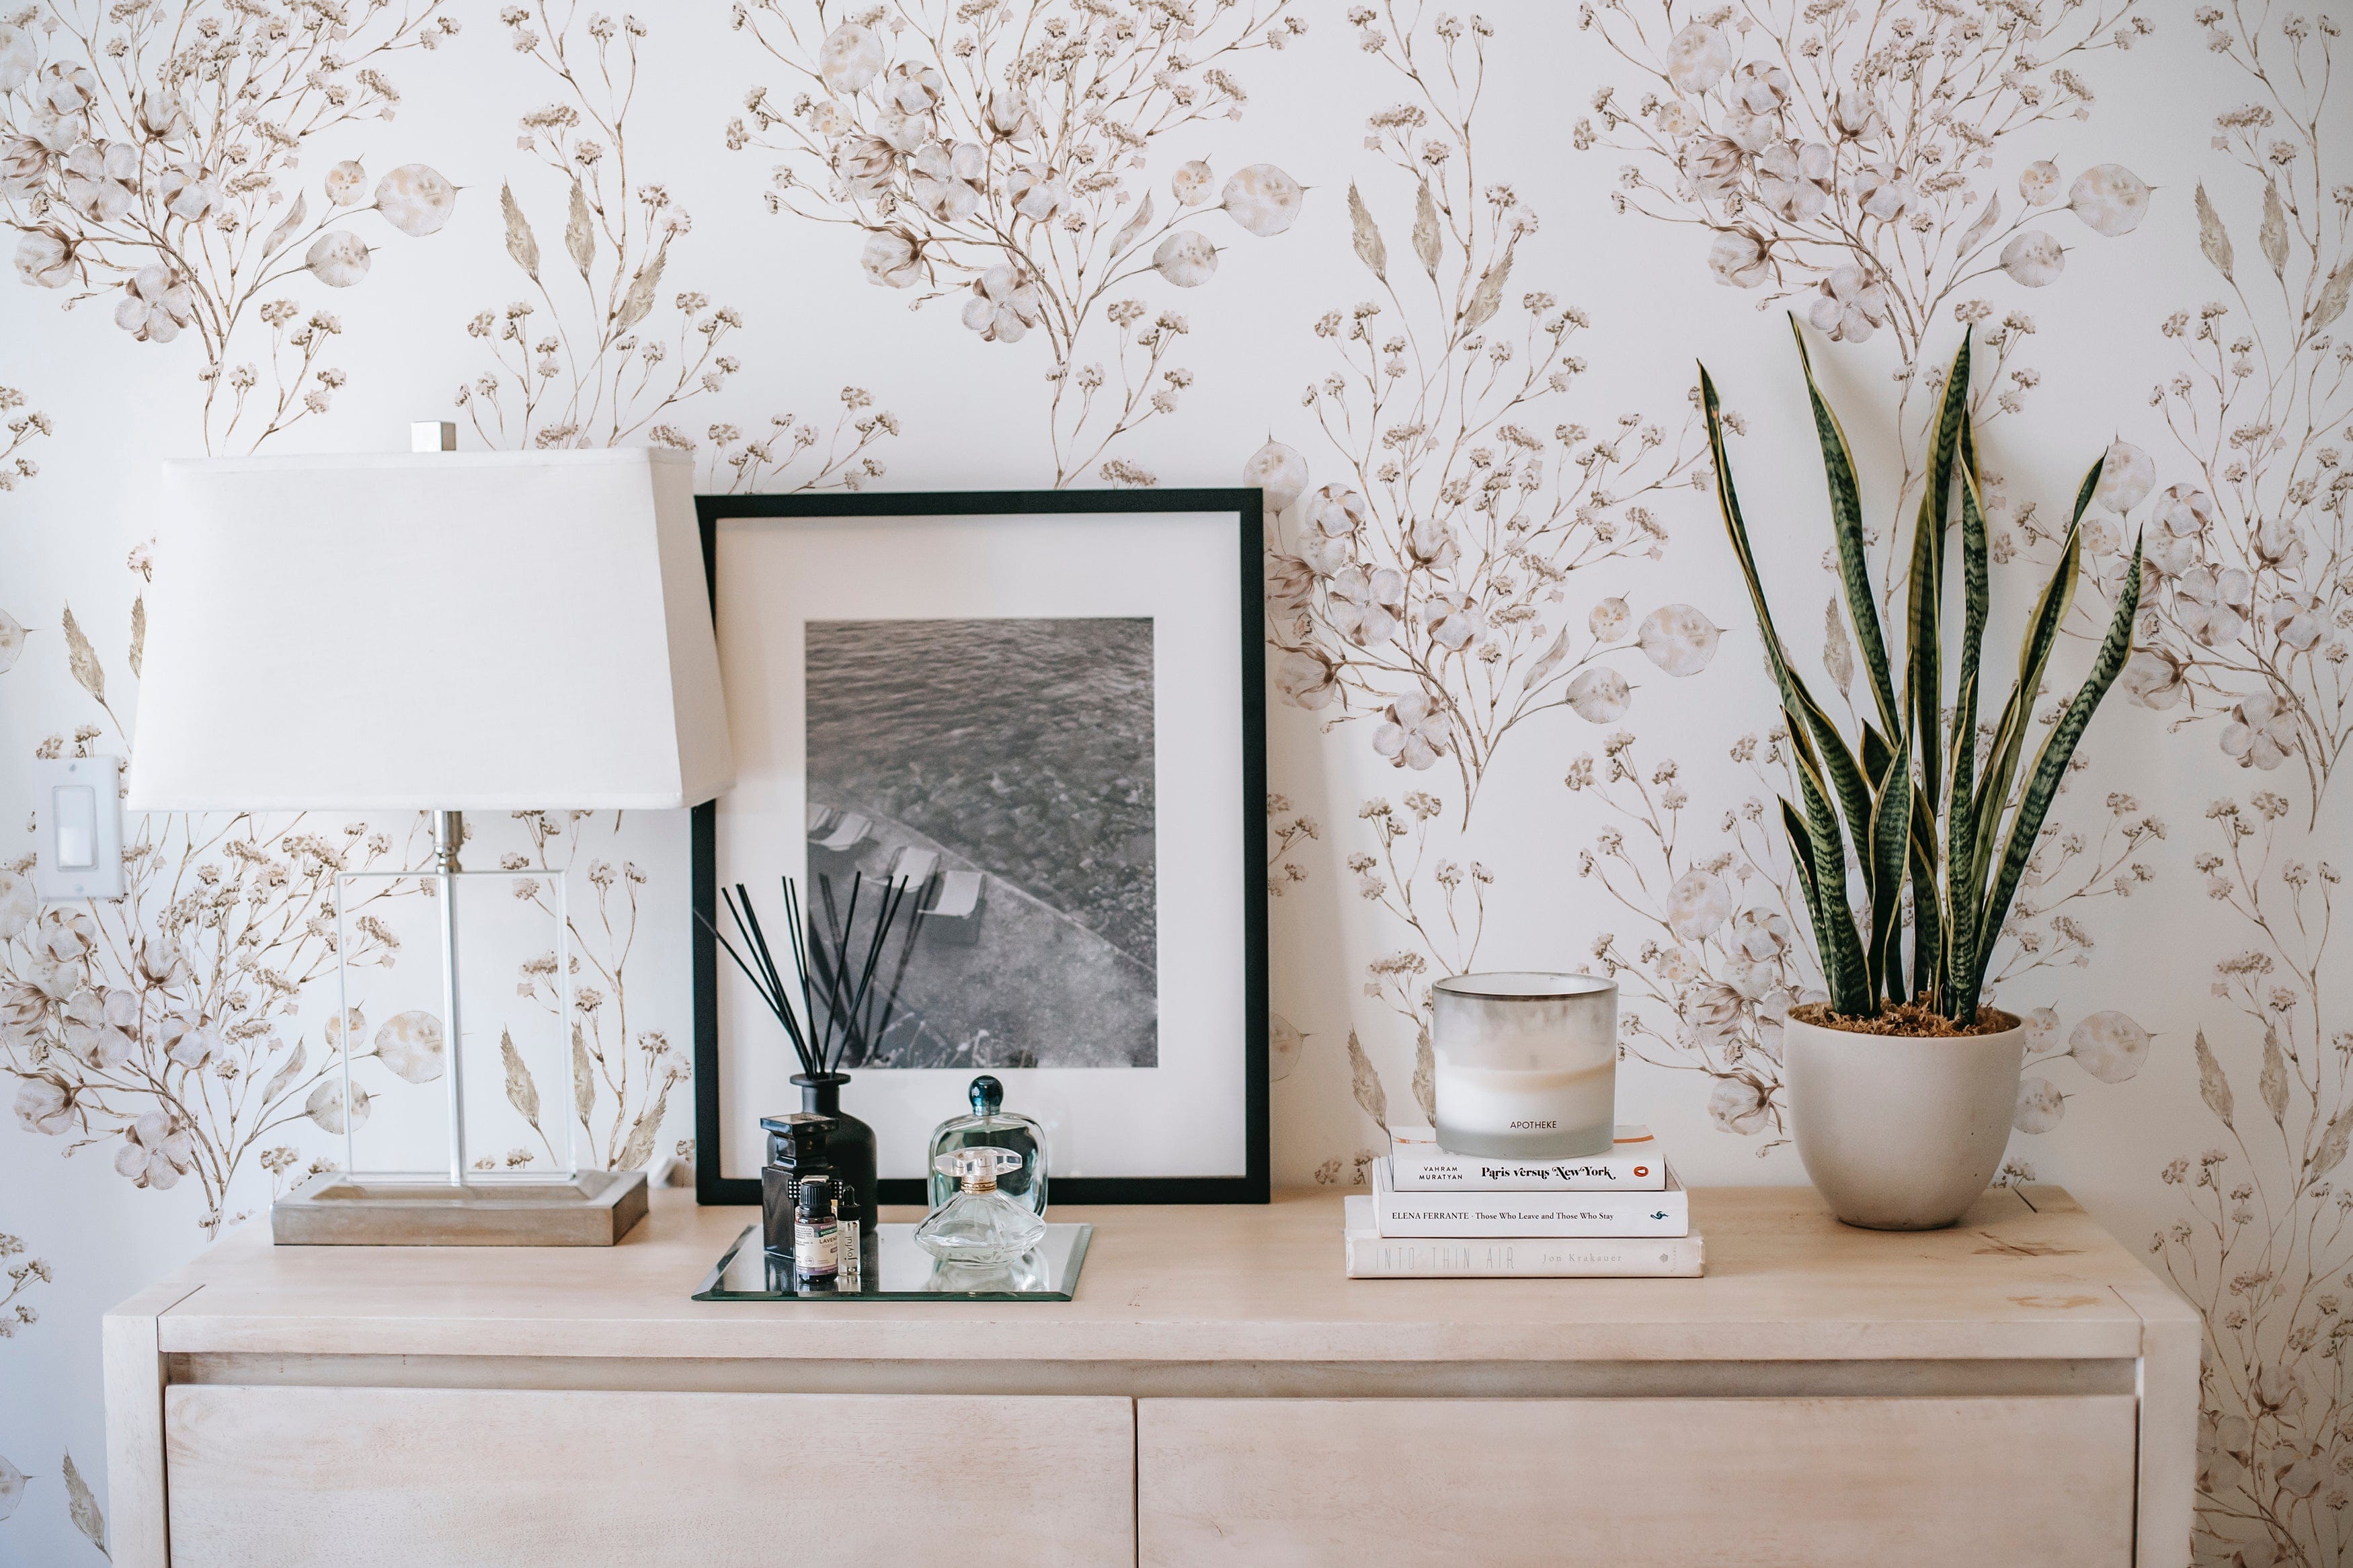 A modern dresser against the Boho Winter Floral Wallpaper, with the botanical print providing a stylish backdrop to the simple and elegant home decor items.